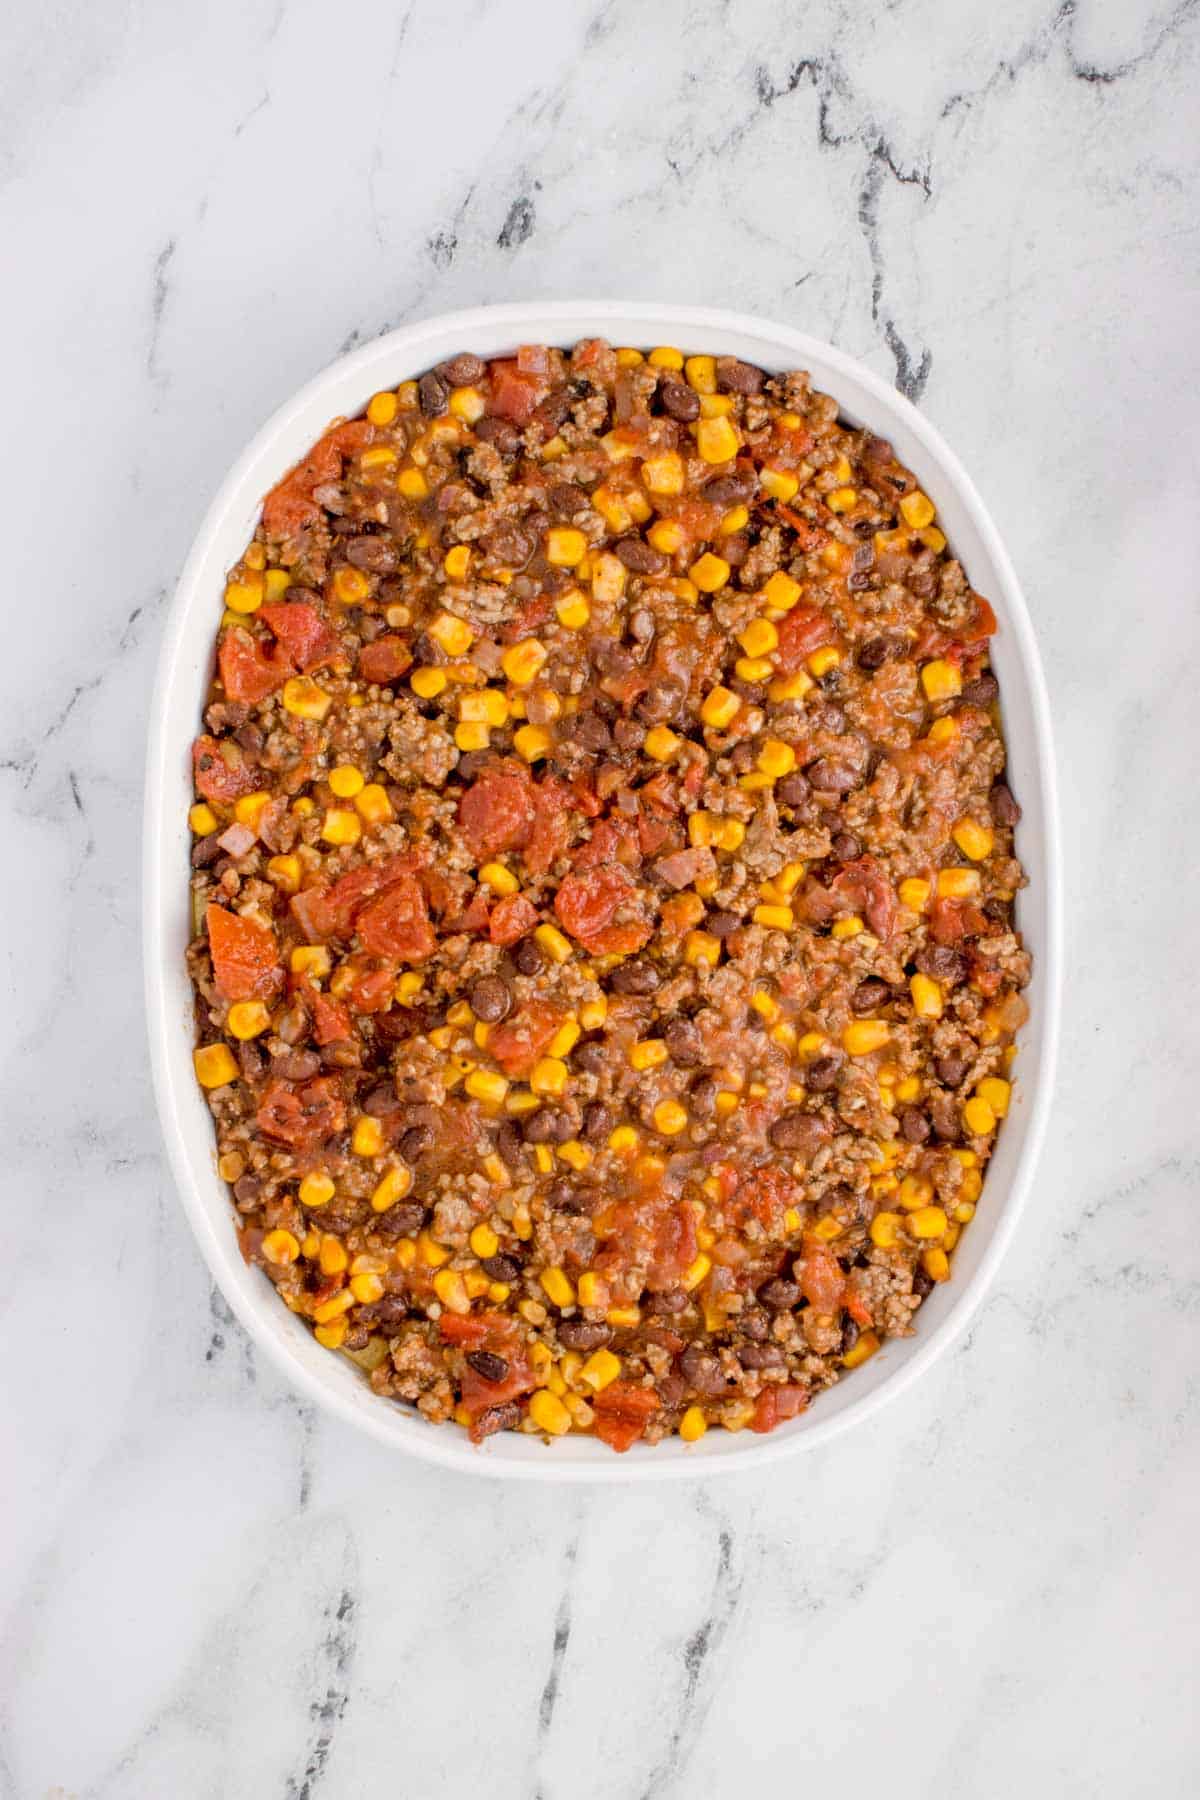 ground beef, corn and tomato mixture in a baking dish